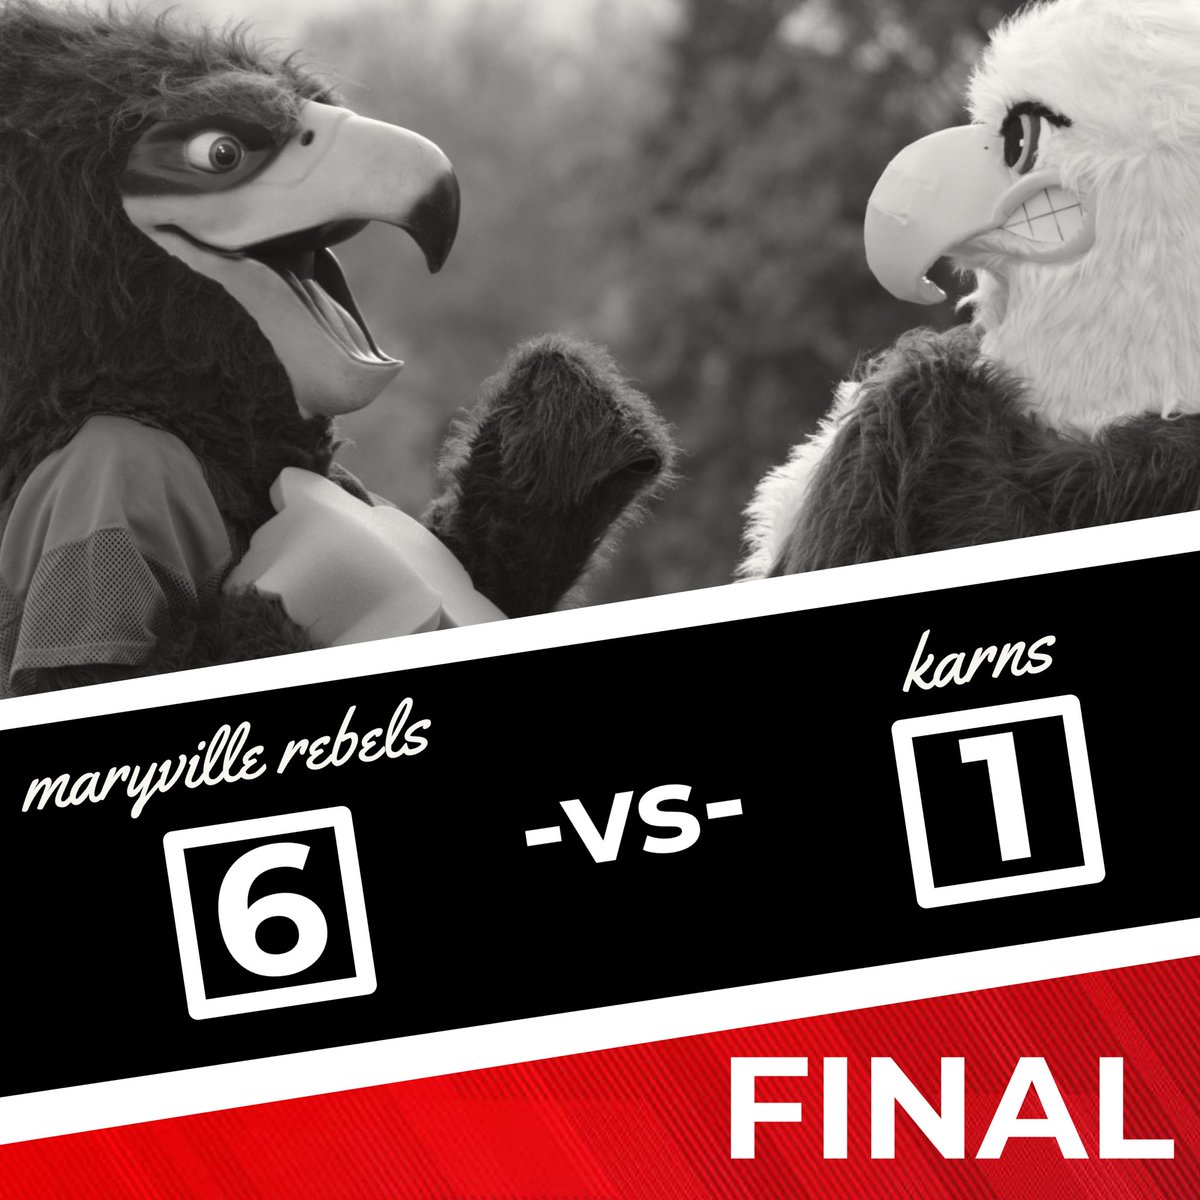 It was a fun night sharing this WIN with our friends from Coulter Grove and Montgomery Ridge! #GoRebels #GoHawks #GoEagles #WeAreMaryville